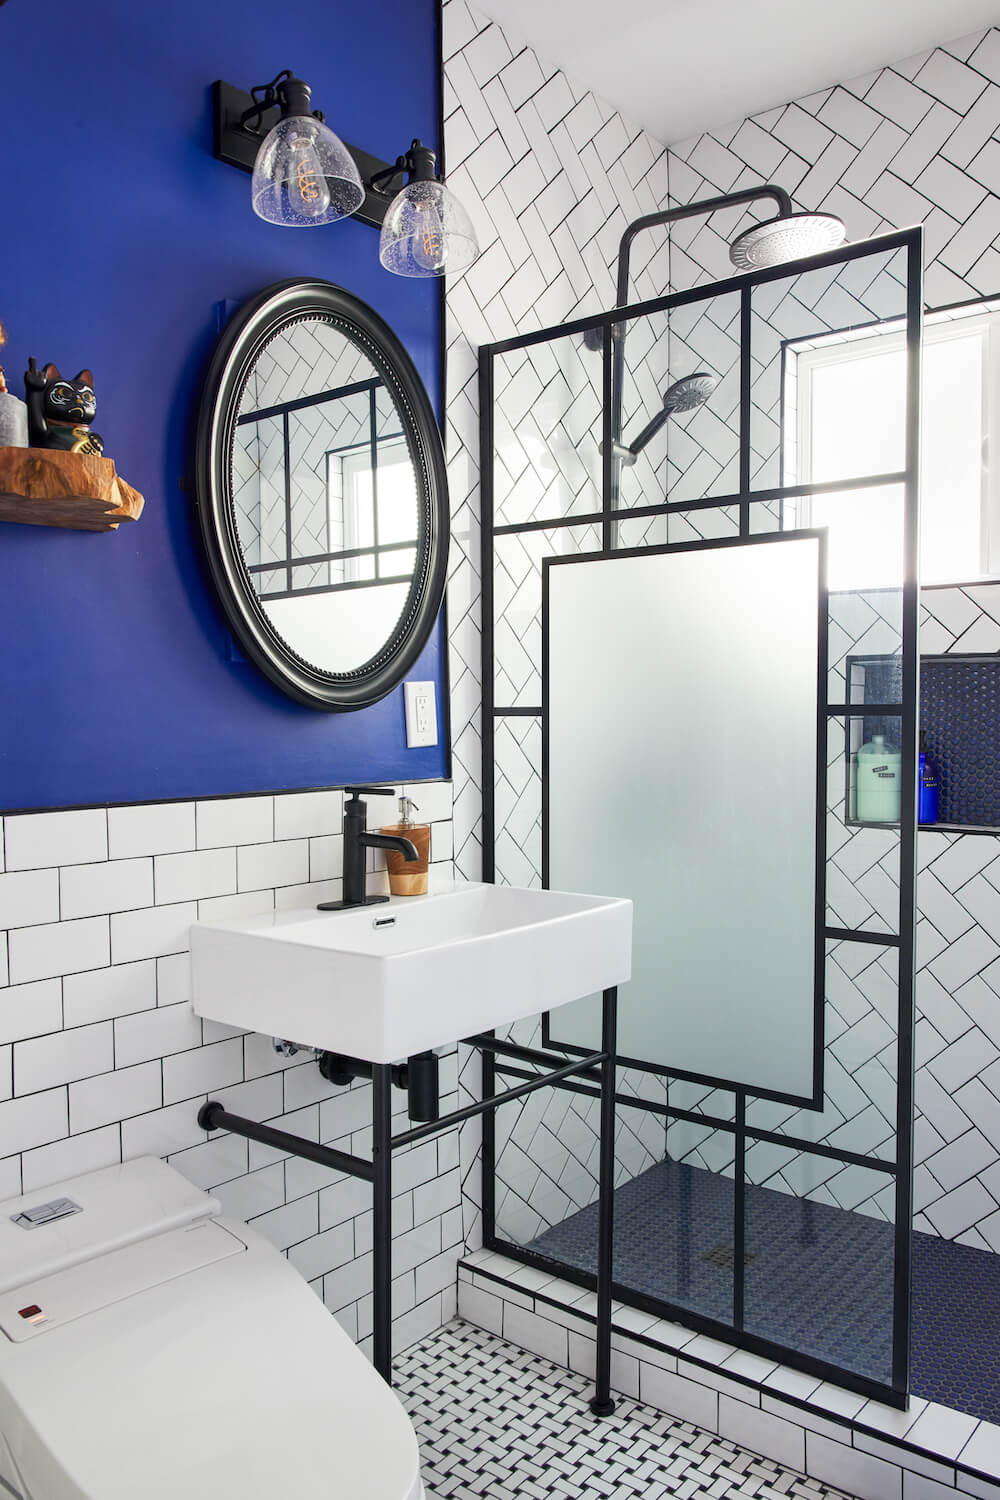 Image of a renovated bathroom with blue accent wall, white sink and subway tile